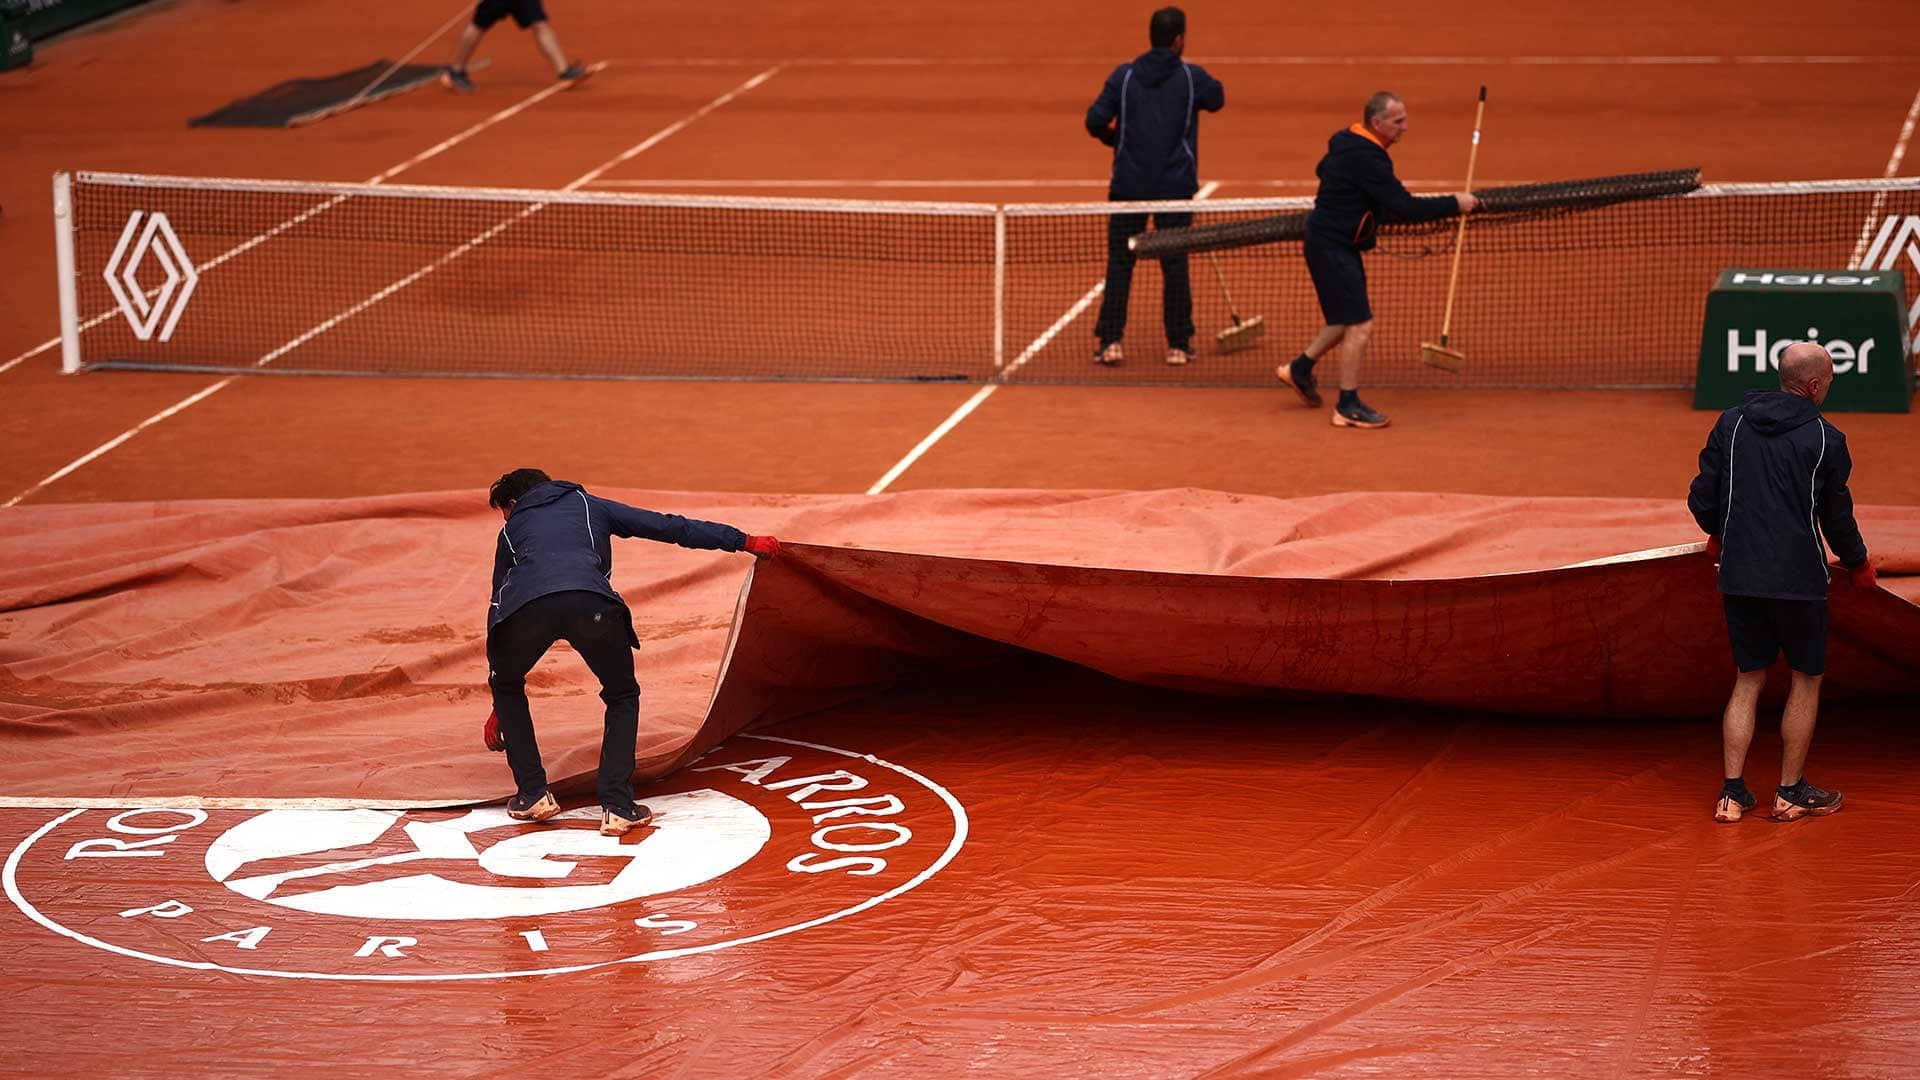 The action has resumed at Roland Garros.